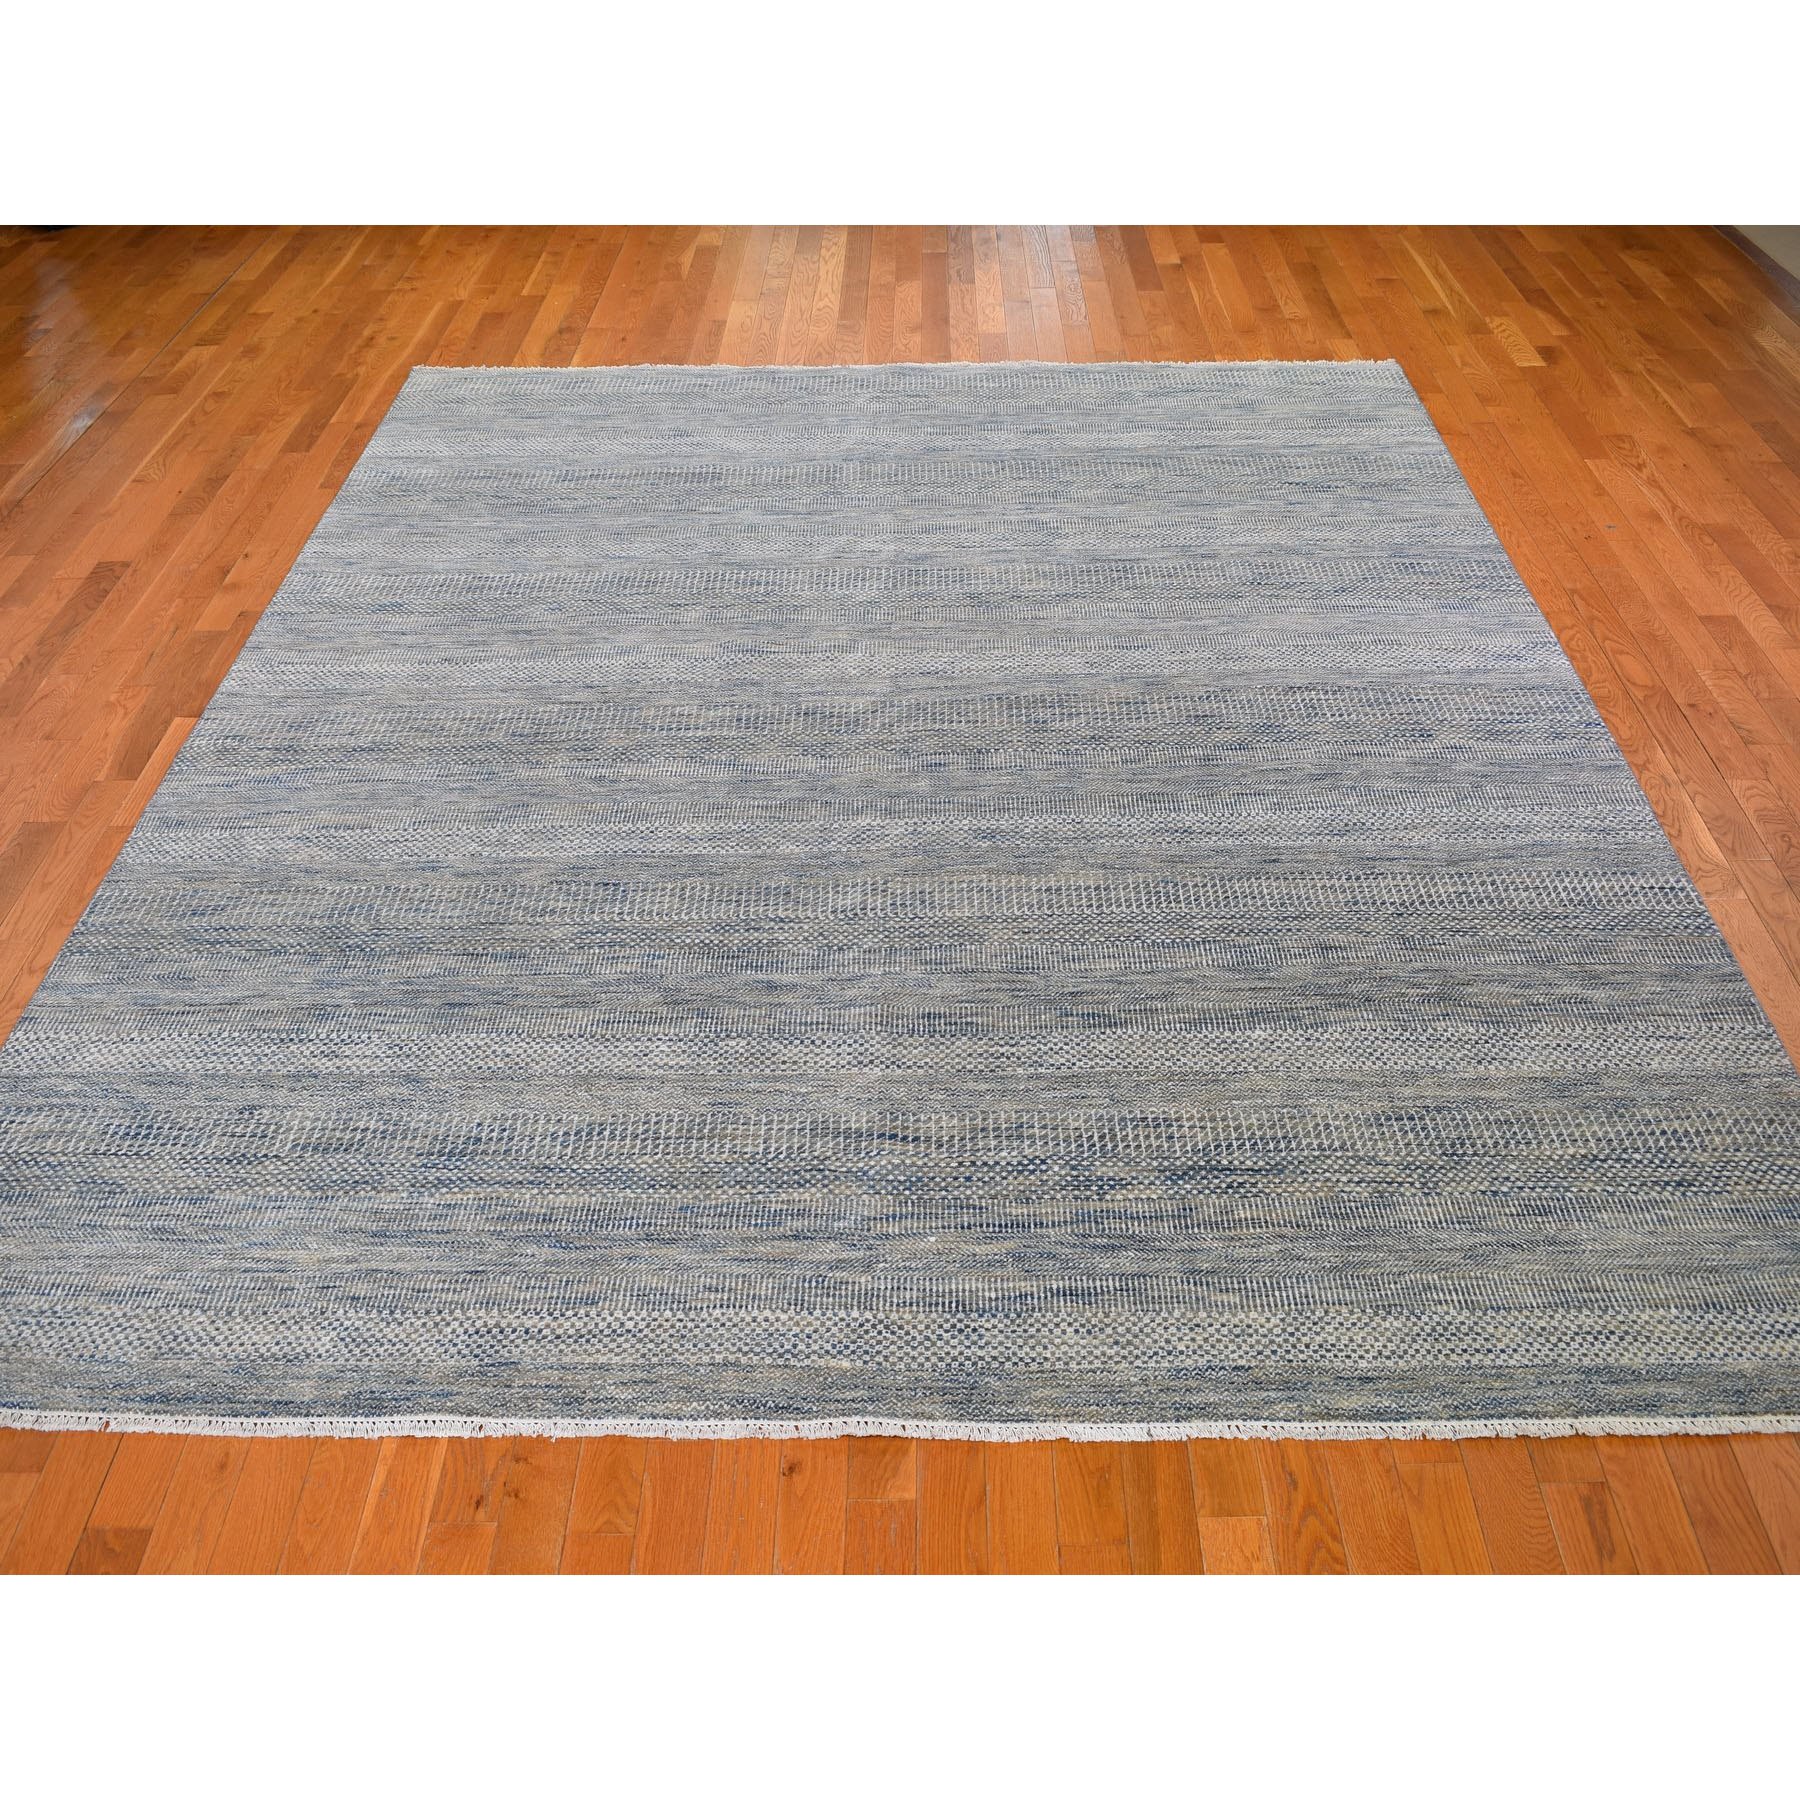 9-1 x12- Blue Grass Design Wool And Silk Hand Knotted Oriental Rug 